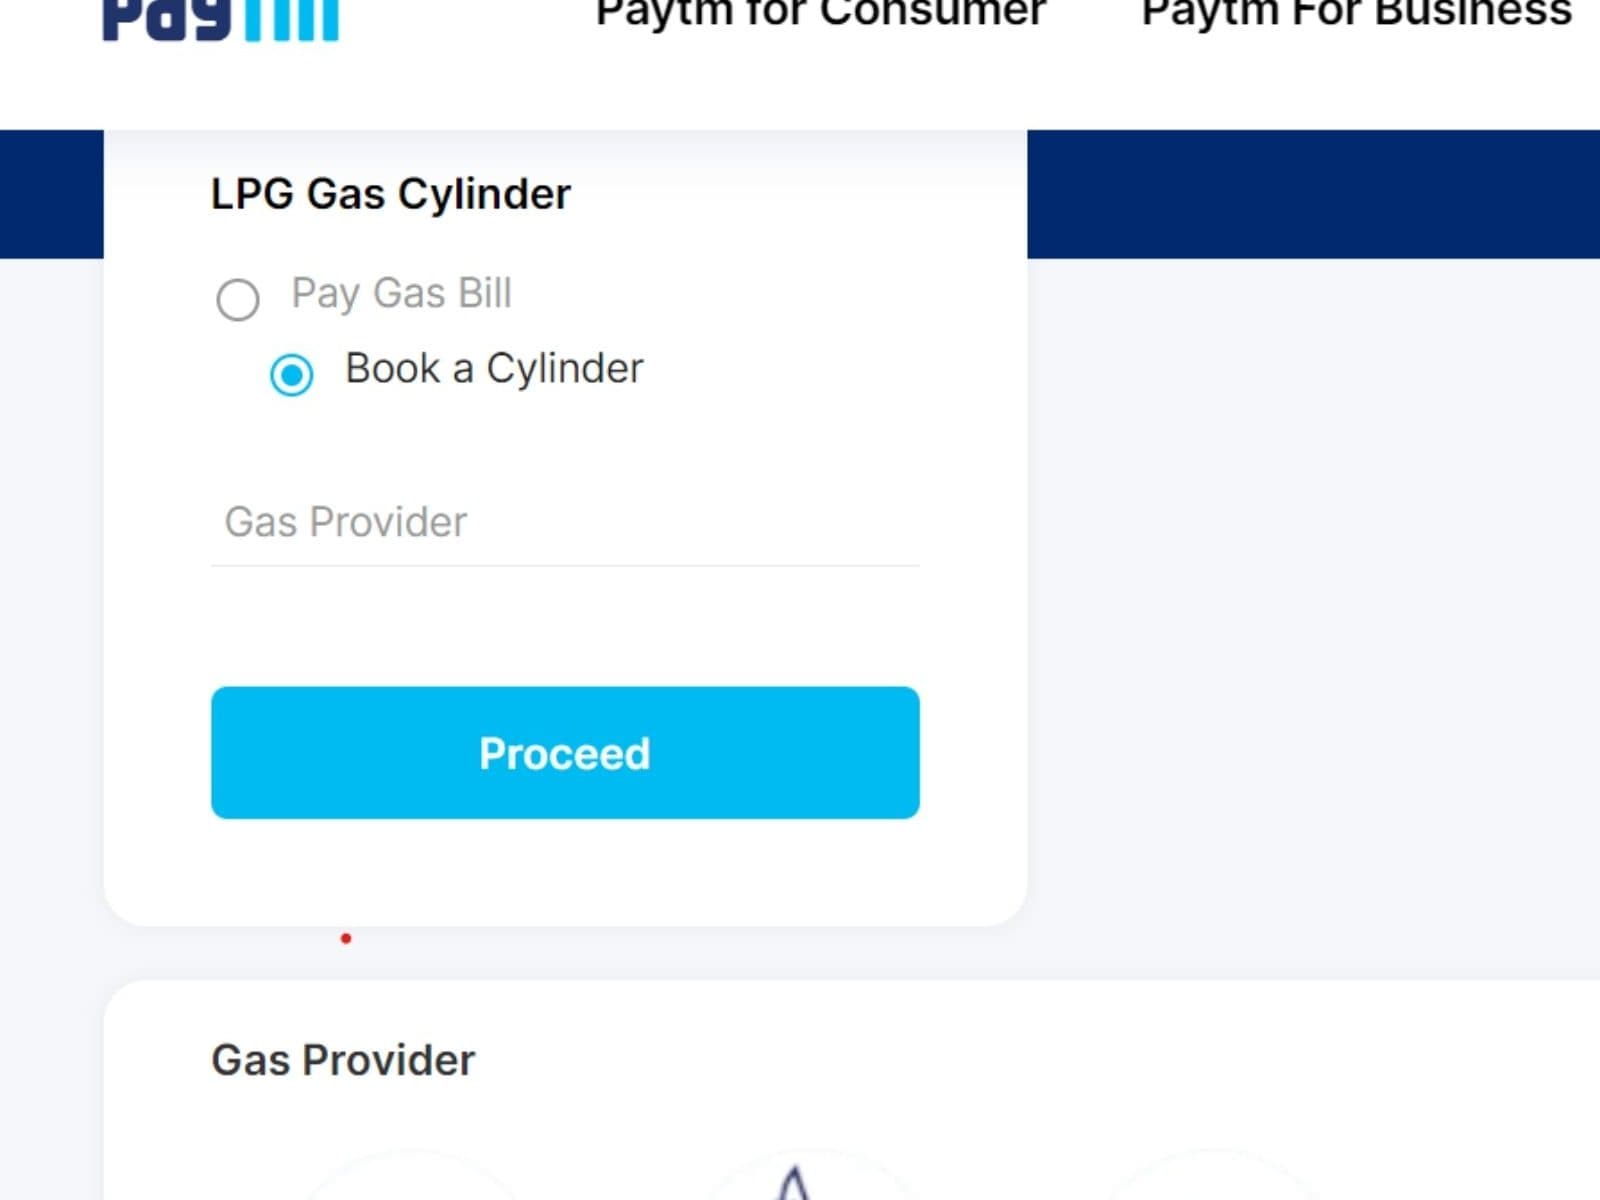 Paytm Is Offering Chance to Get Free LPG Cylinder: Here's How You Can Get It